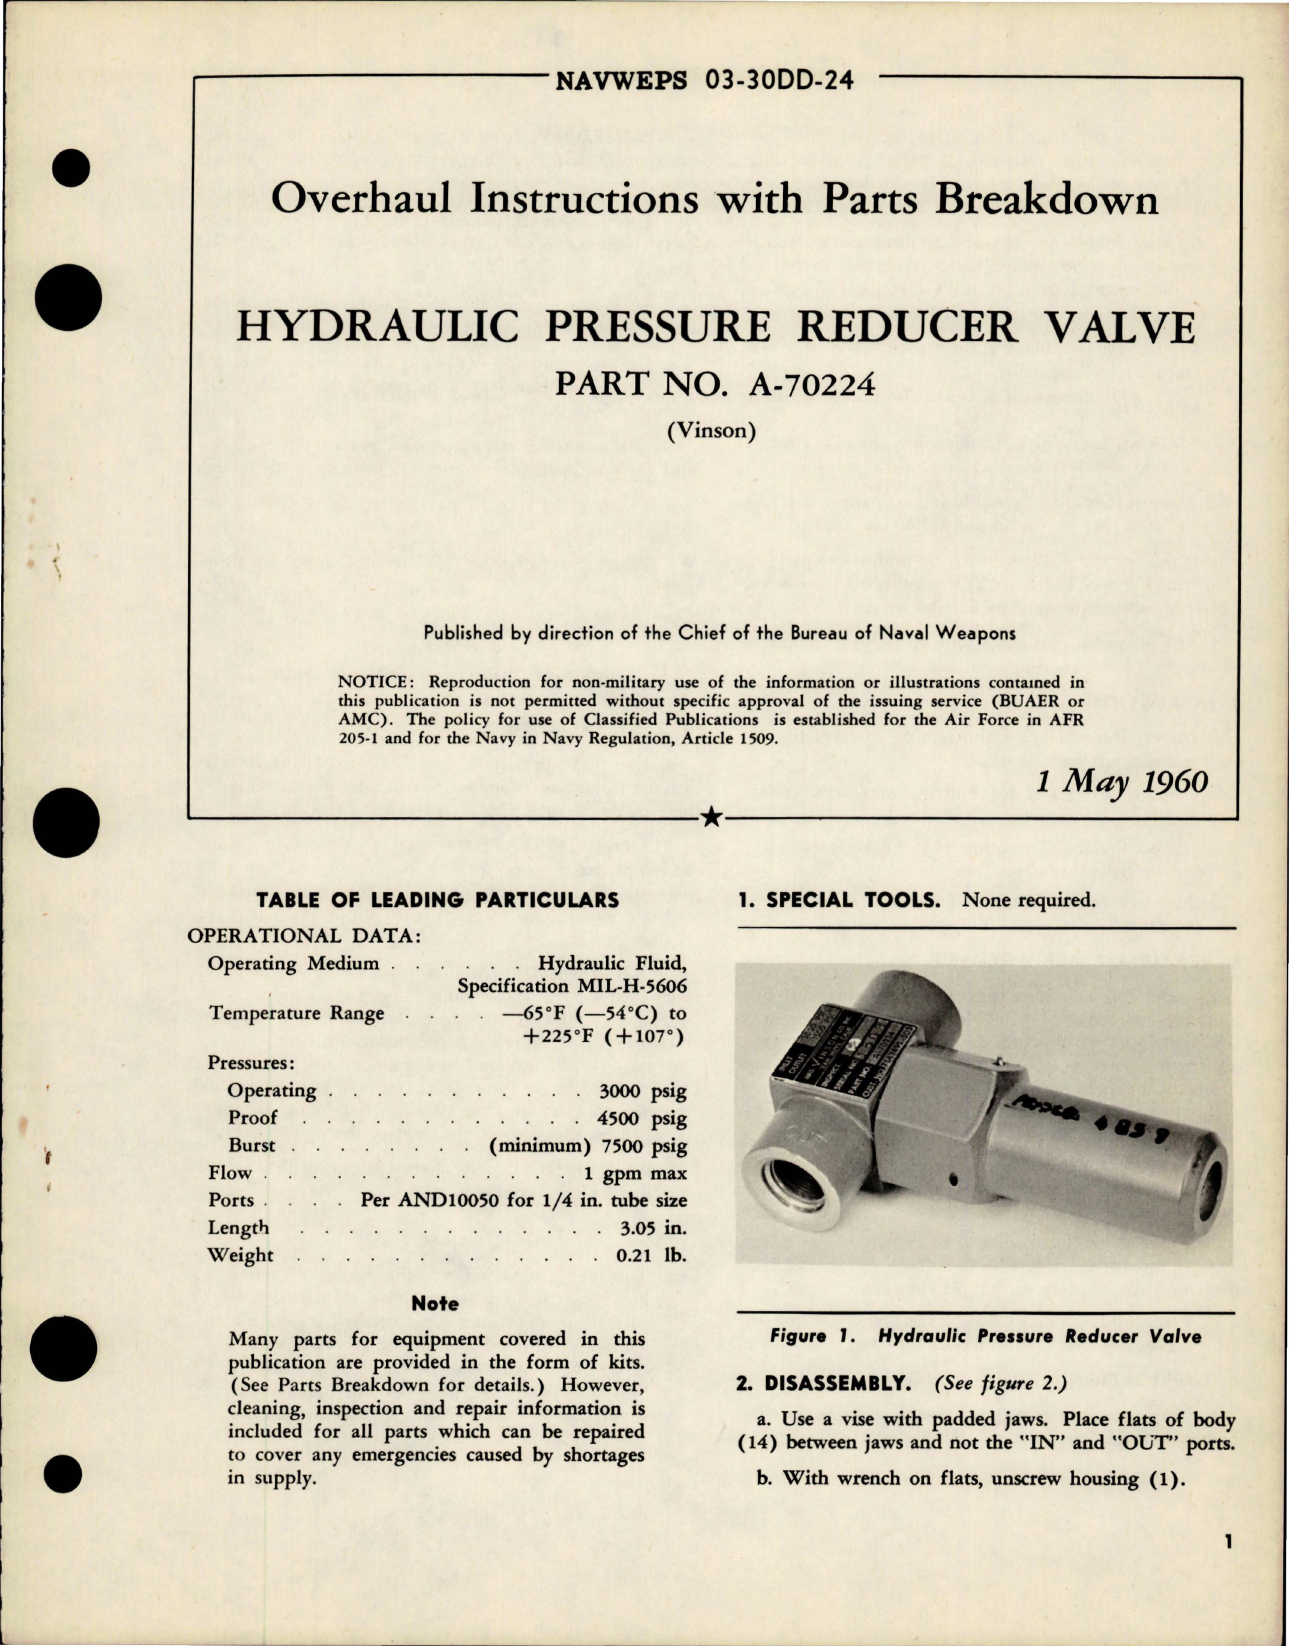 Sample page 1 from AirCorps Library document: Overhaul Instructions with Parts Breakdown for Hydraulic Pressure Reducer Valve - Part A-70224 